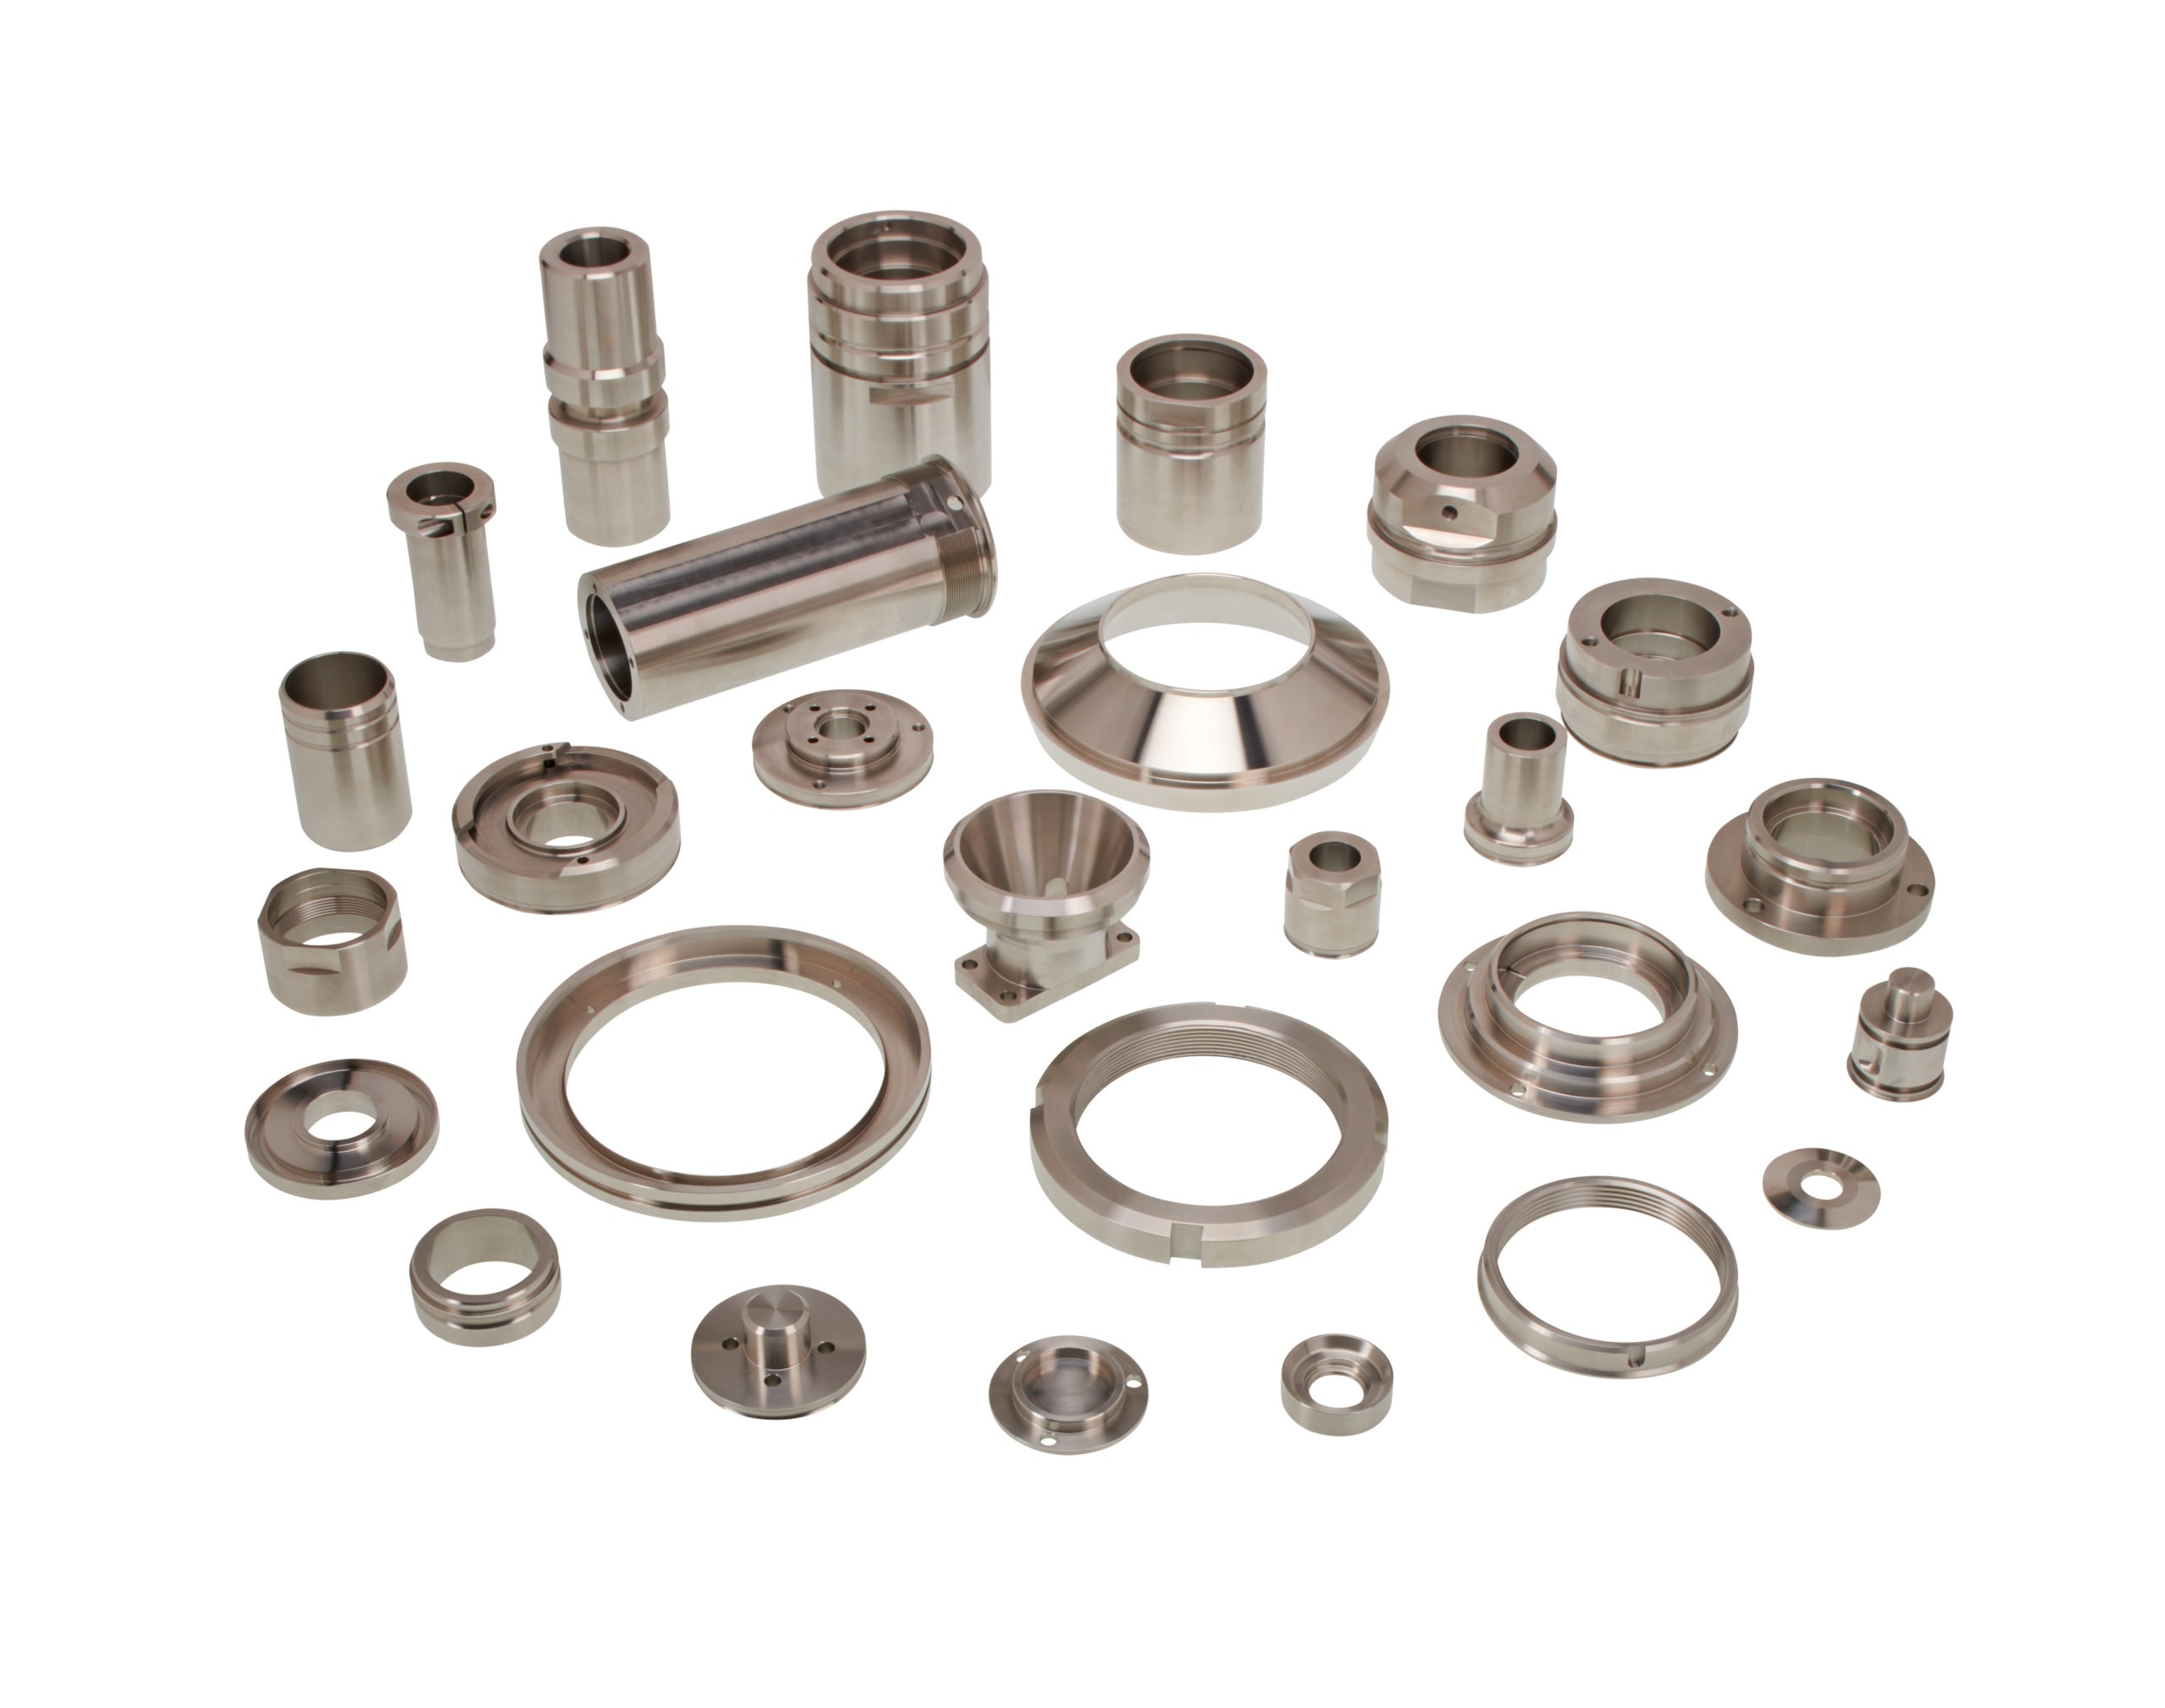 Variety of CNC Turned Parts 3 - CNC Turning Services